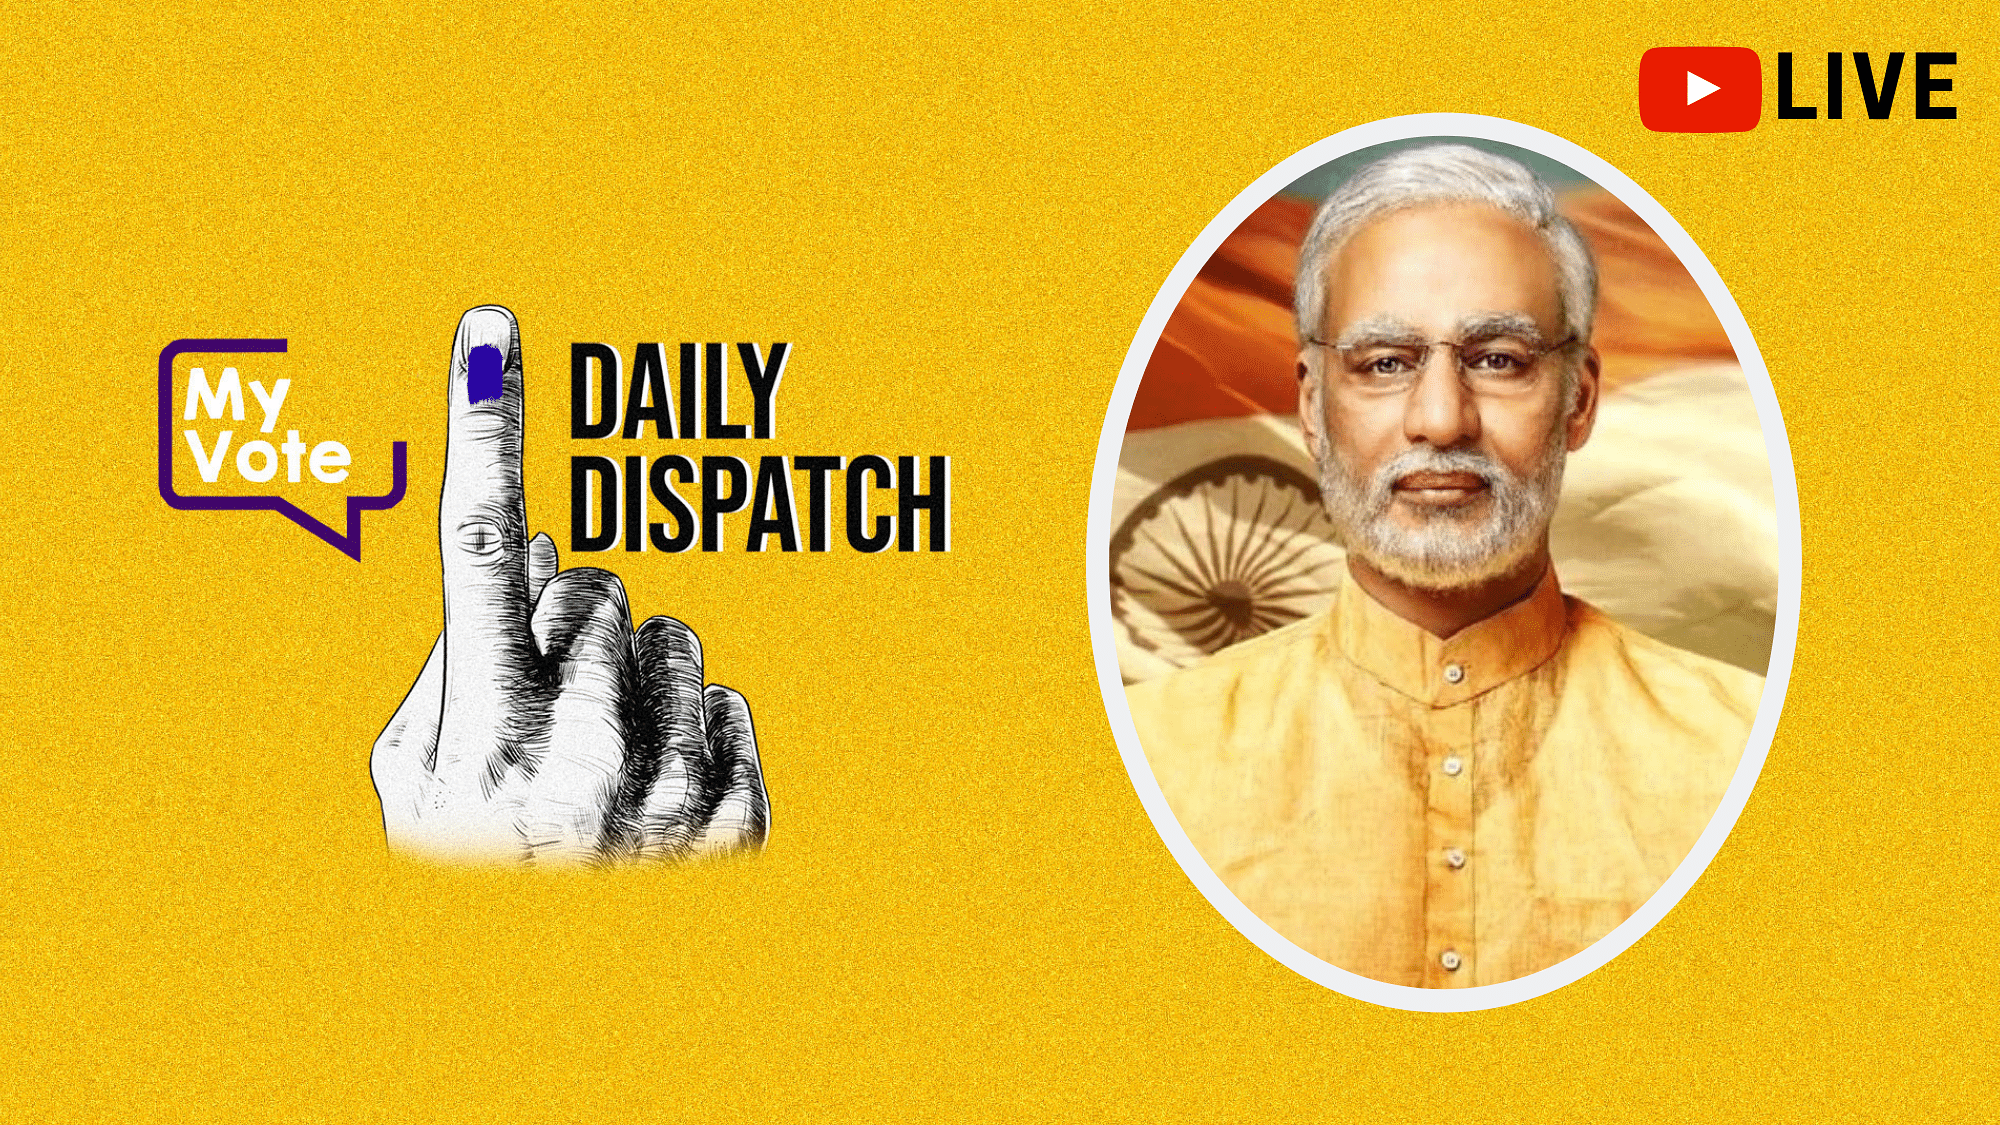 Catch all the top headlines and updates of the 2019 Lok Sabha elections through the day.